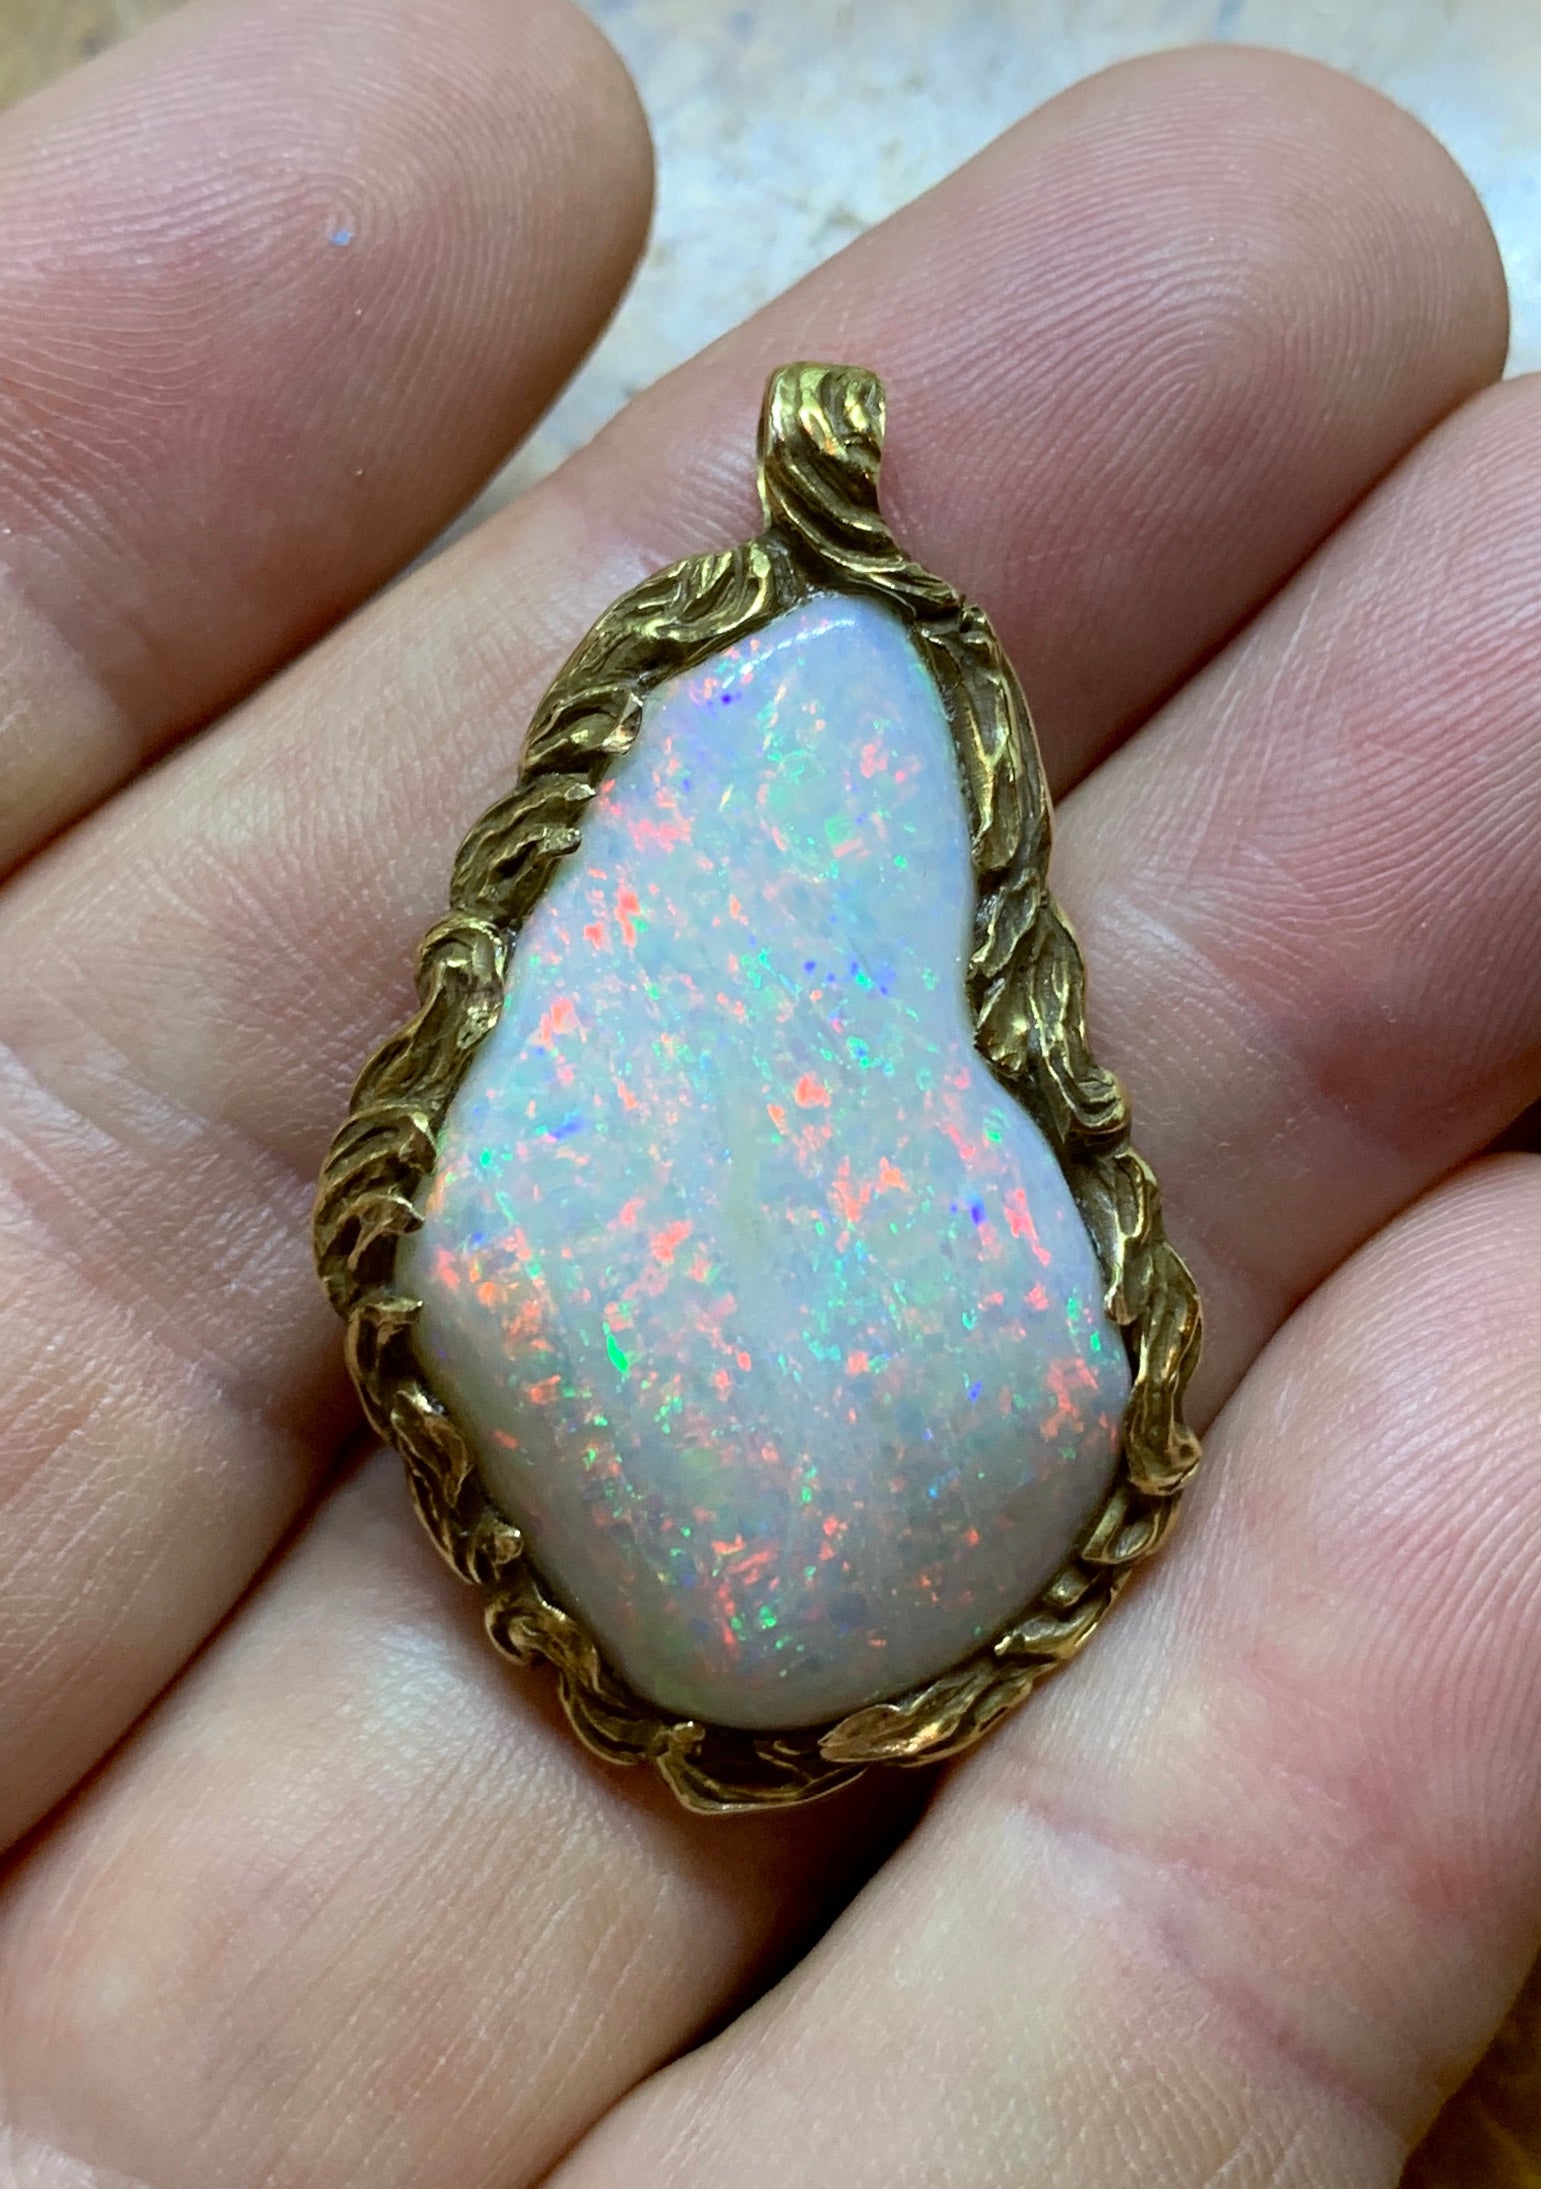 This is an absolutely spectacular 30 Carat Fire Opal Pendant in a stunning Flame Motif setting in 14 Karat Gold.  The extraordinary opal is 1 3/8 inches tall and is 7/8 inch wide.  The opal has magnificent fire with an exuberance of red throughout